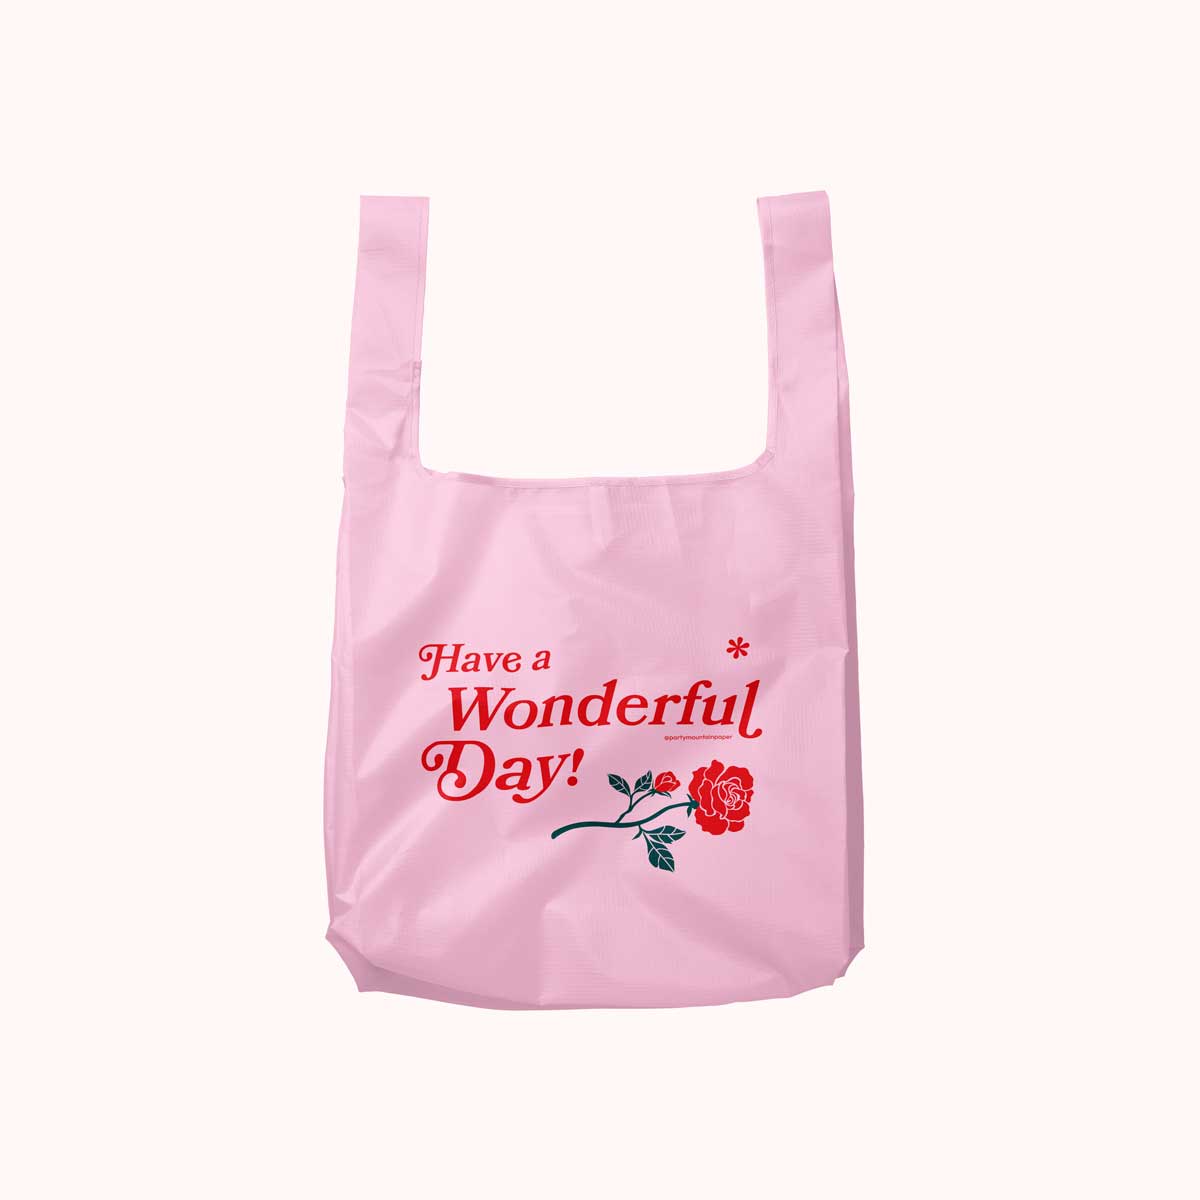 Have a Wonderful Day Foldable Nylon Tote